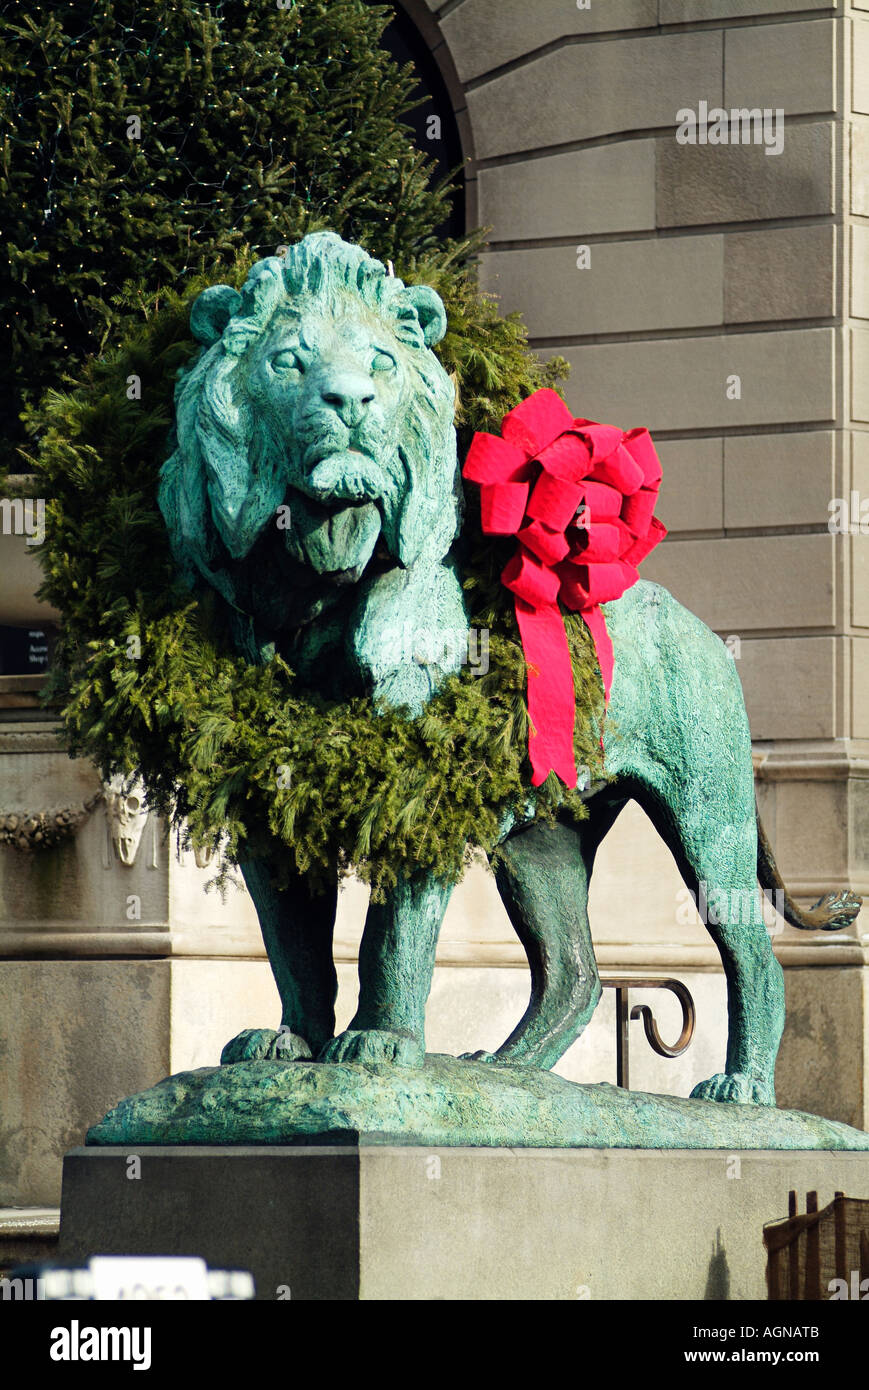 A Bronze Lion Statue With Wreaths Outside the Art Institute of Chicago Stock Photo